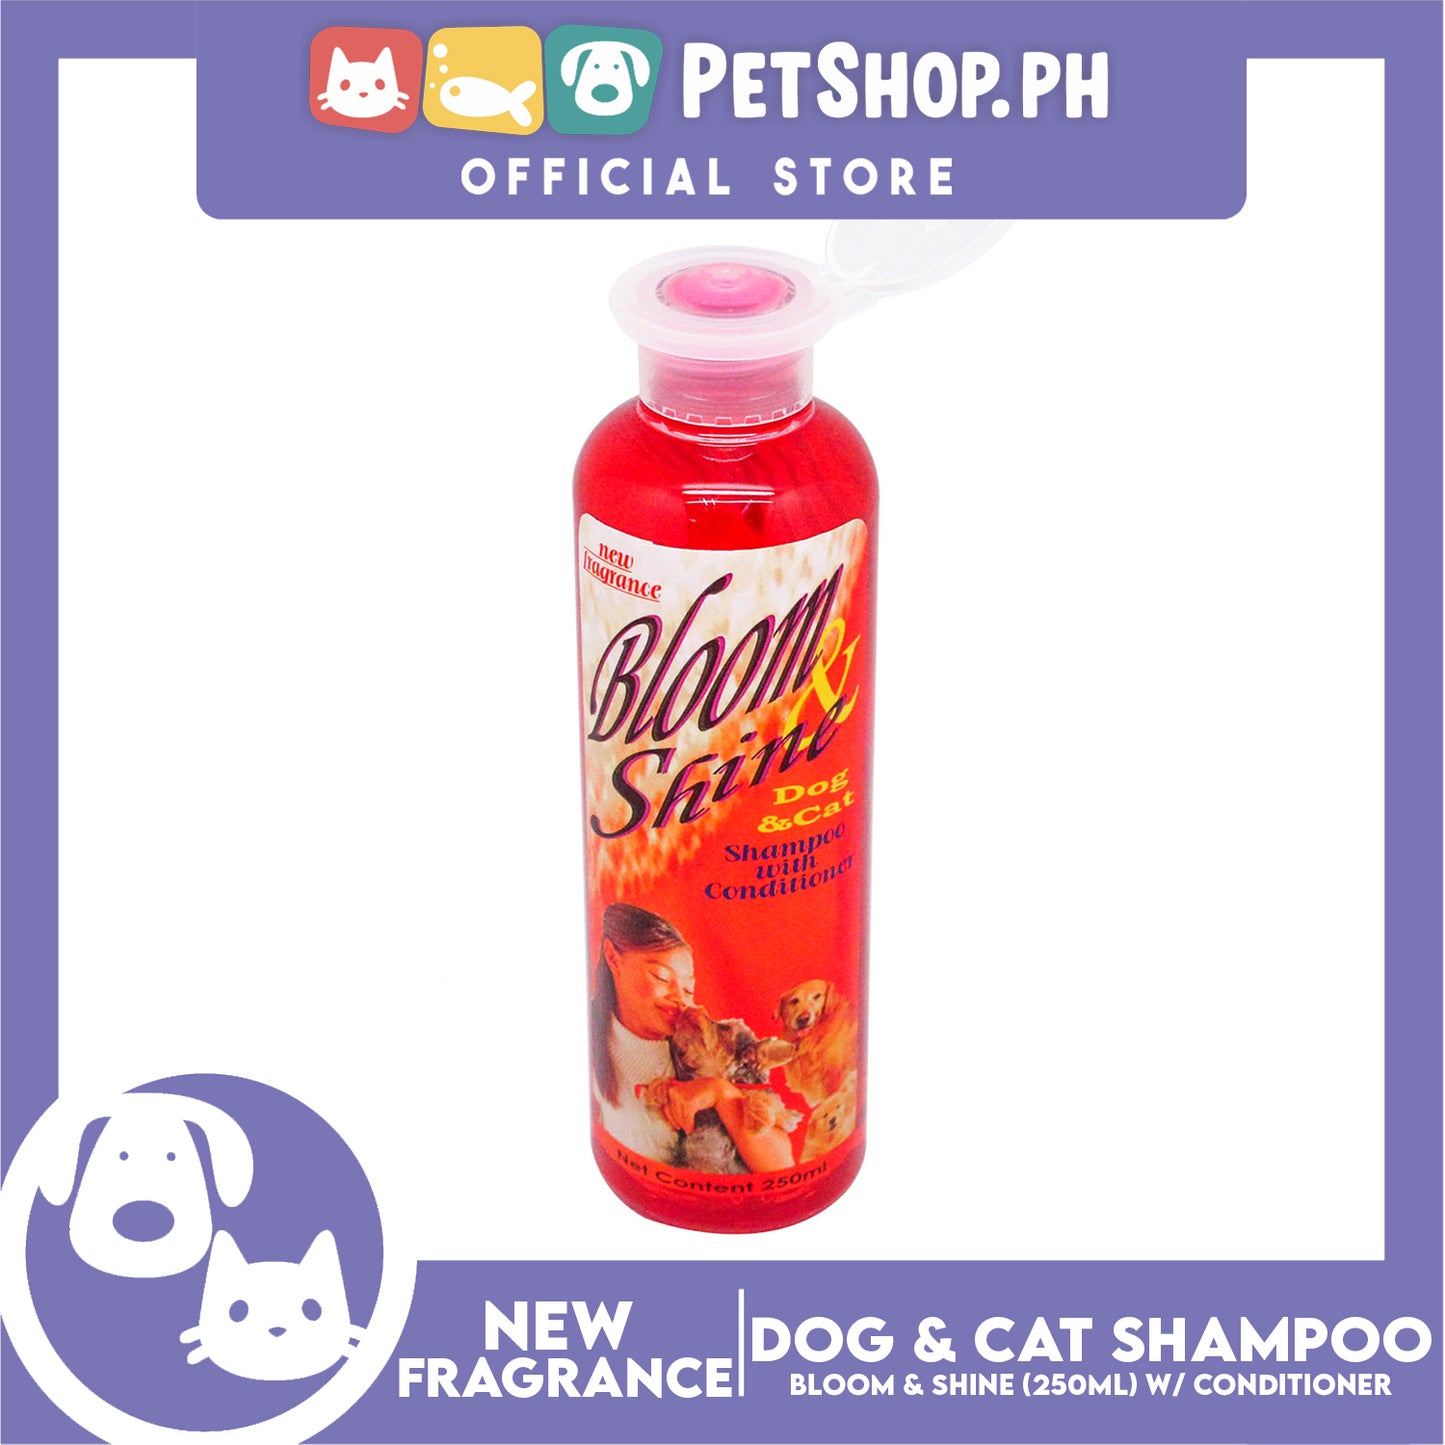 Bloom And Shine Dog And Cat Shampoo With Conditioner 250ml Dog And Cat Grooming